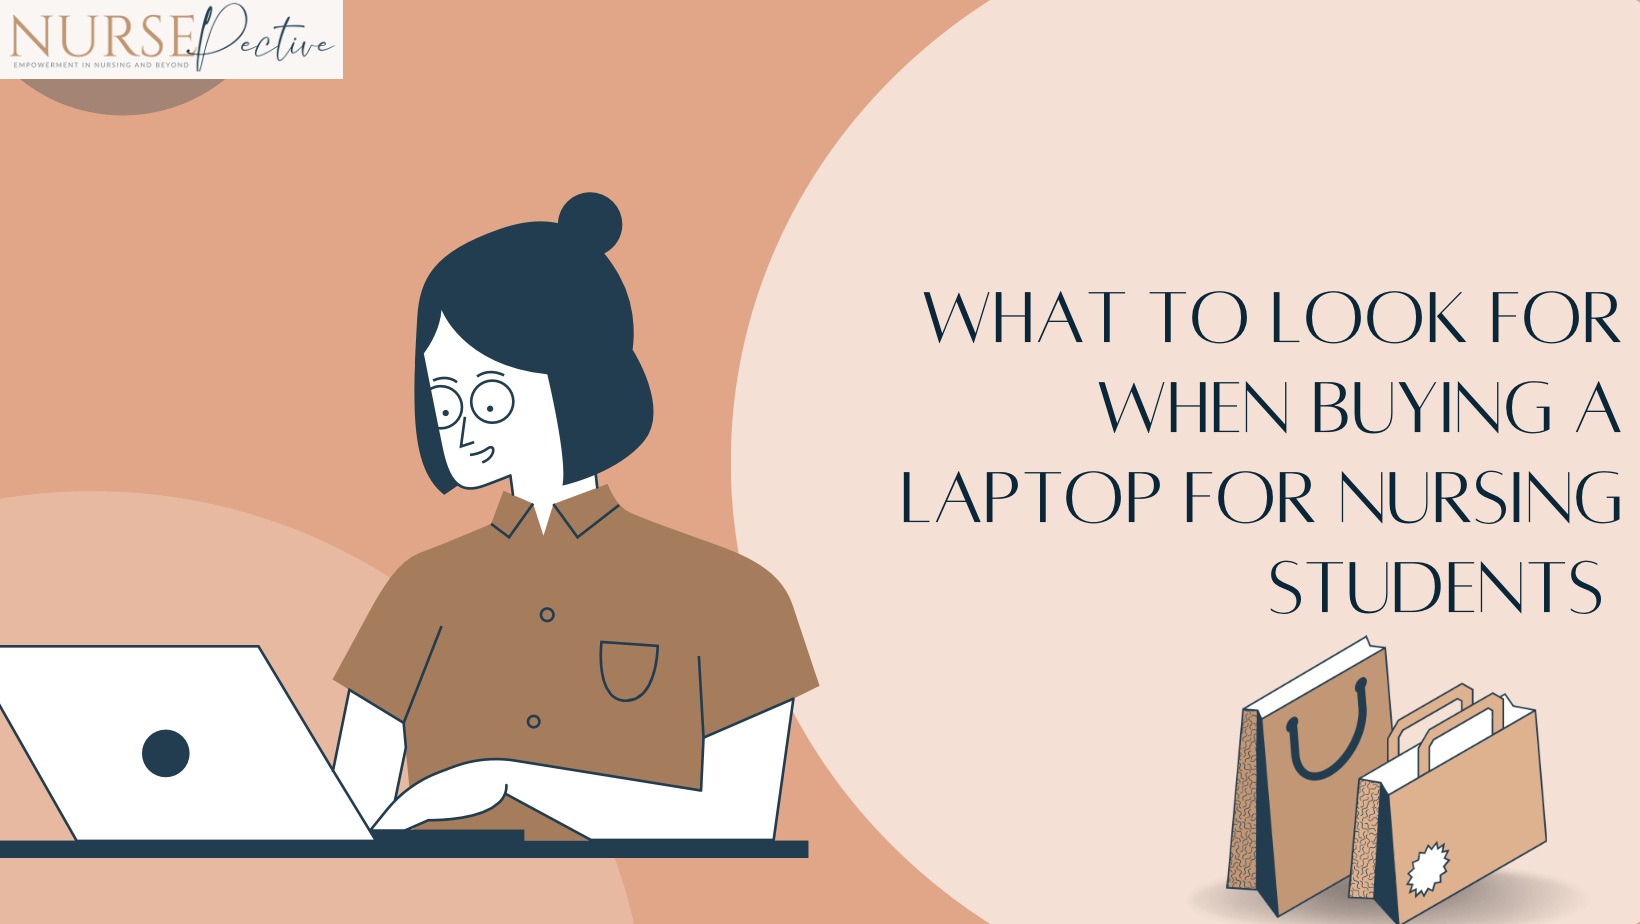 Tips to buy laptop for nursing students